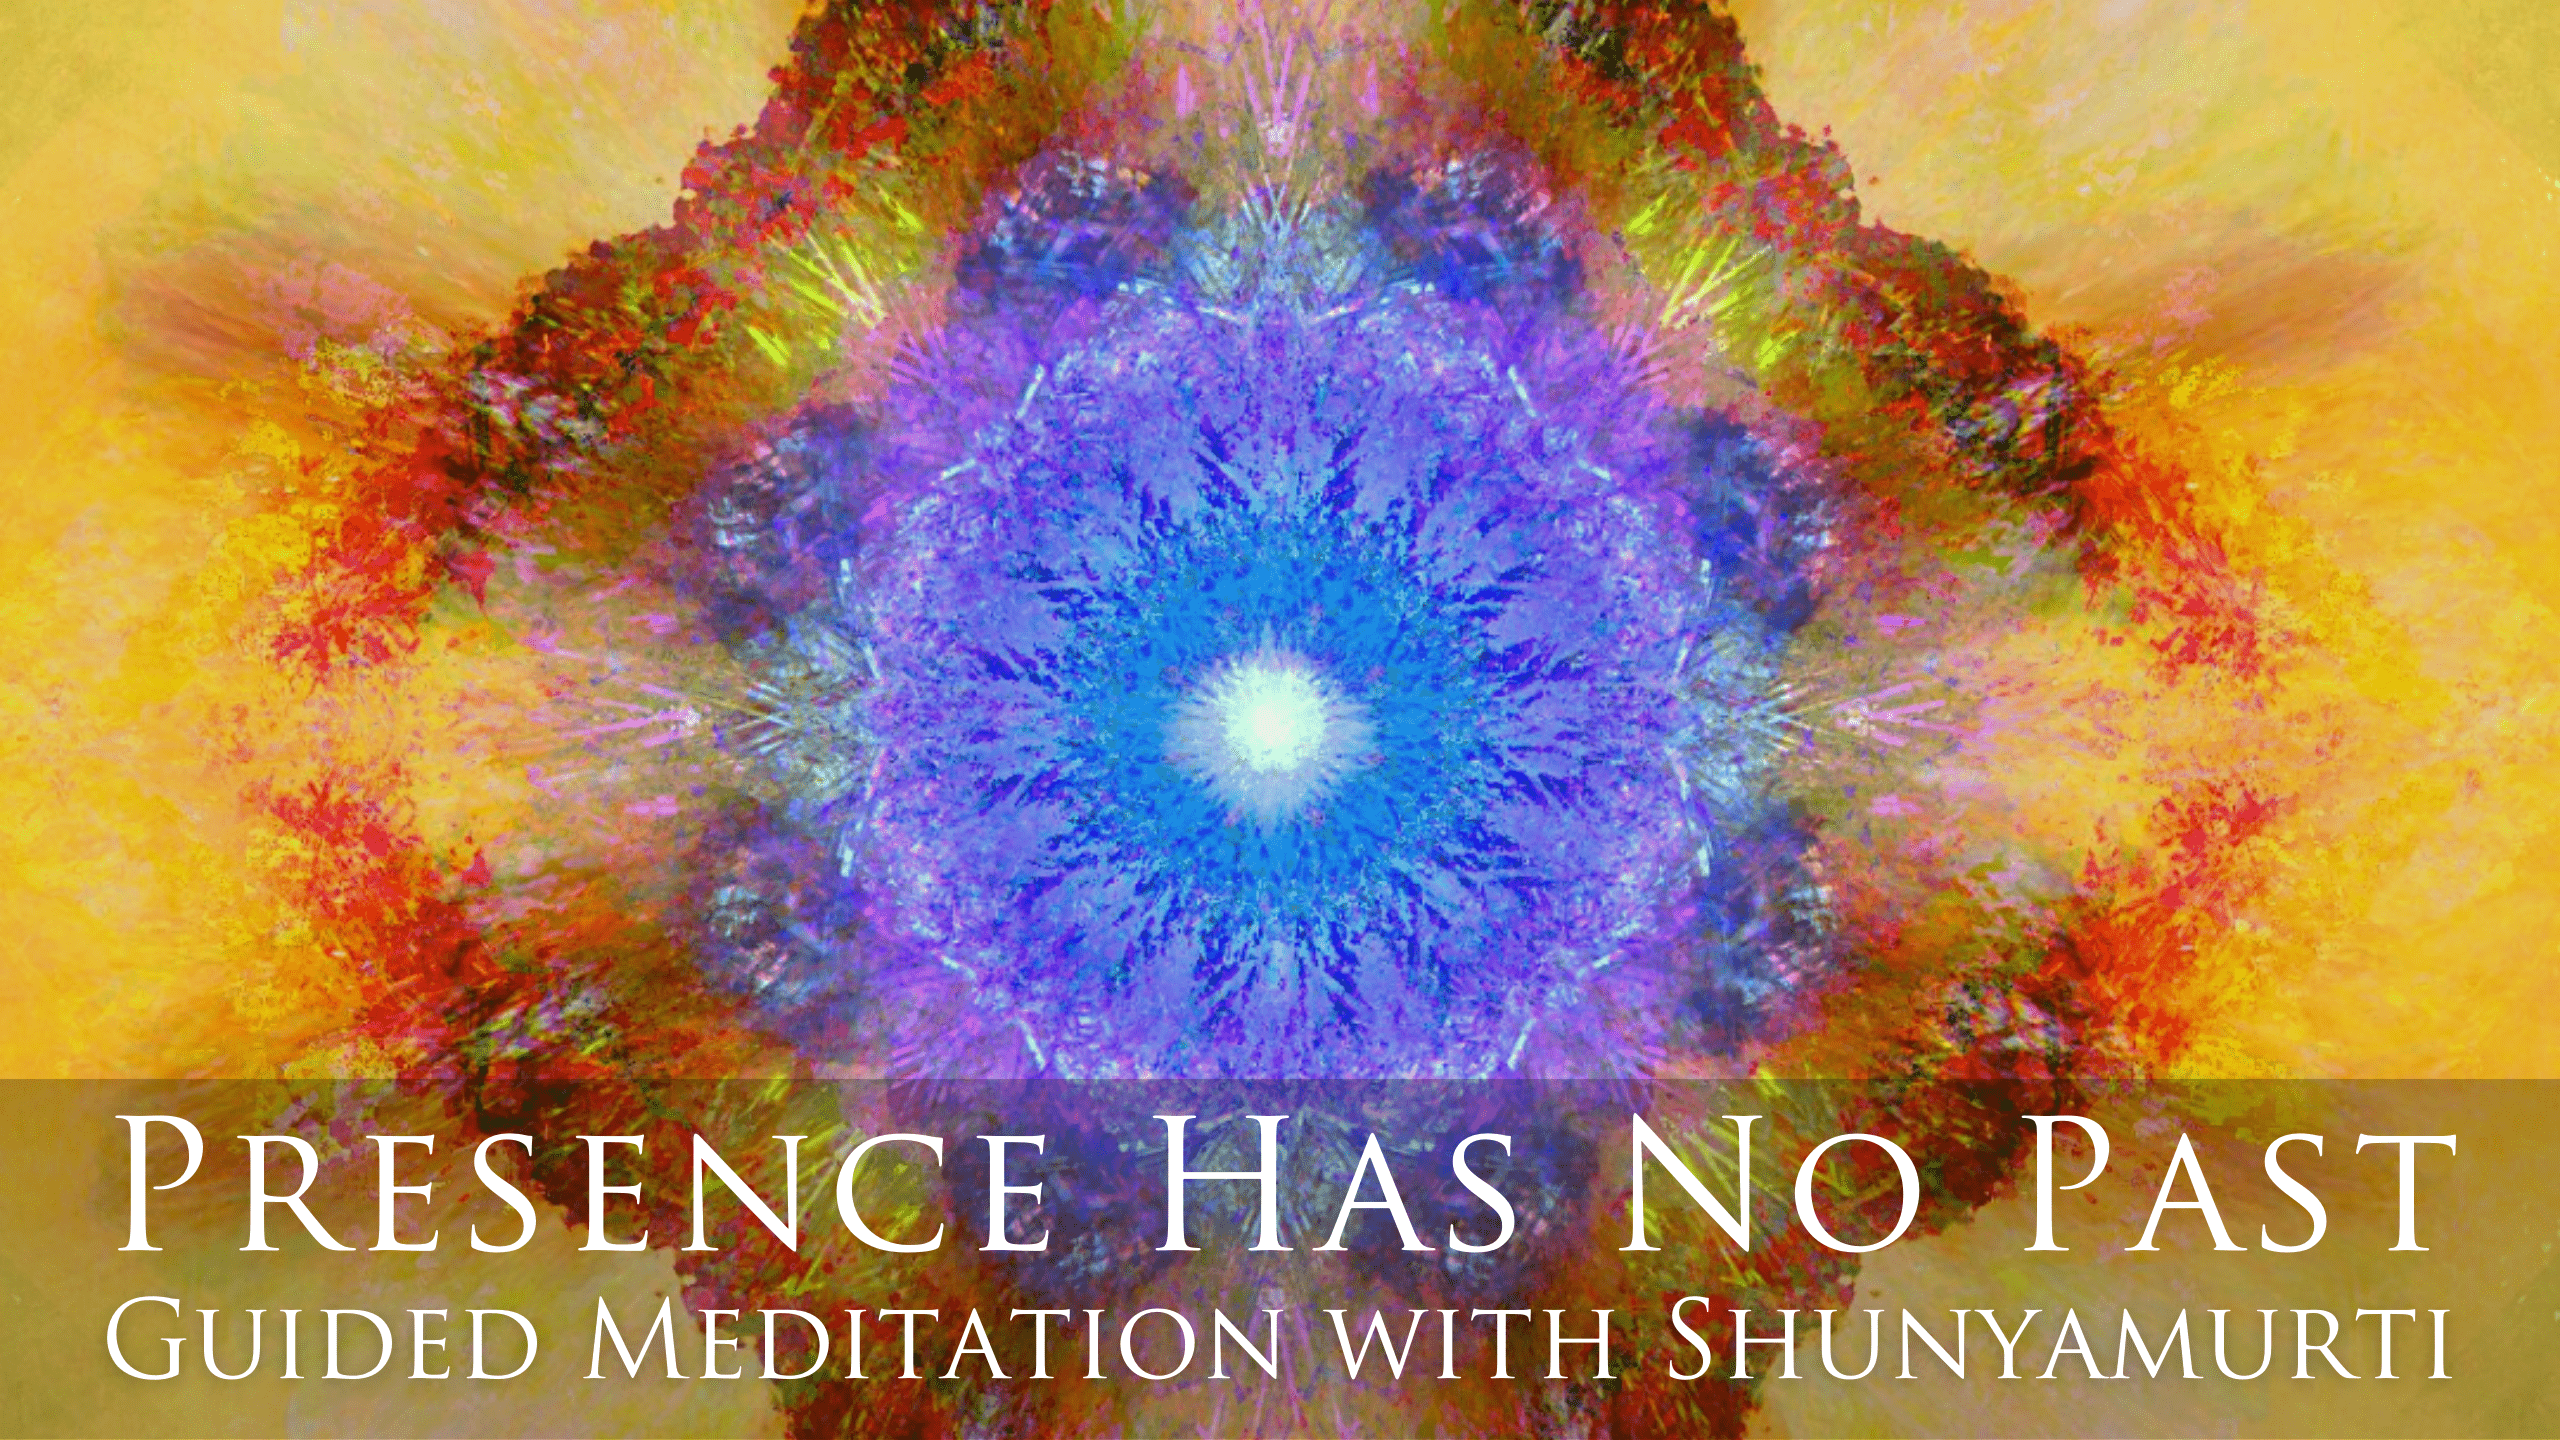 Be Absorbed into the Silent Heart ~ Guided Meditation